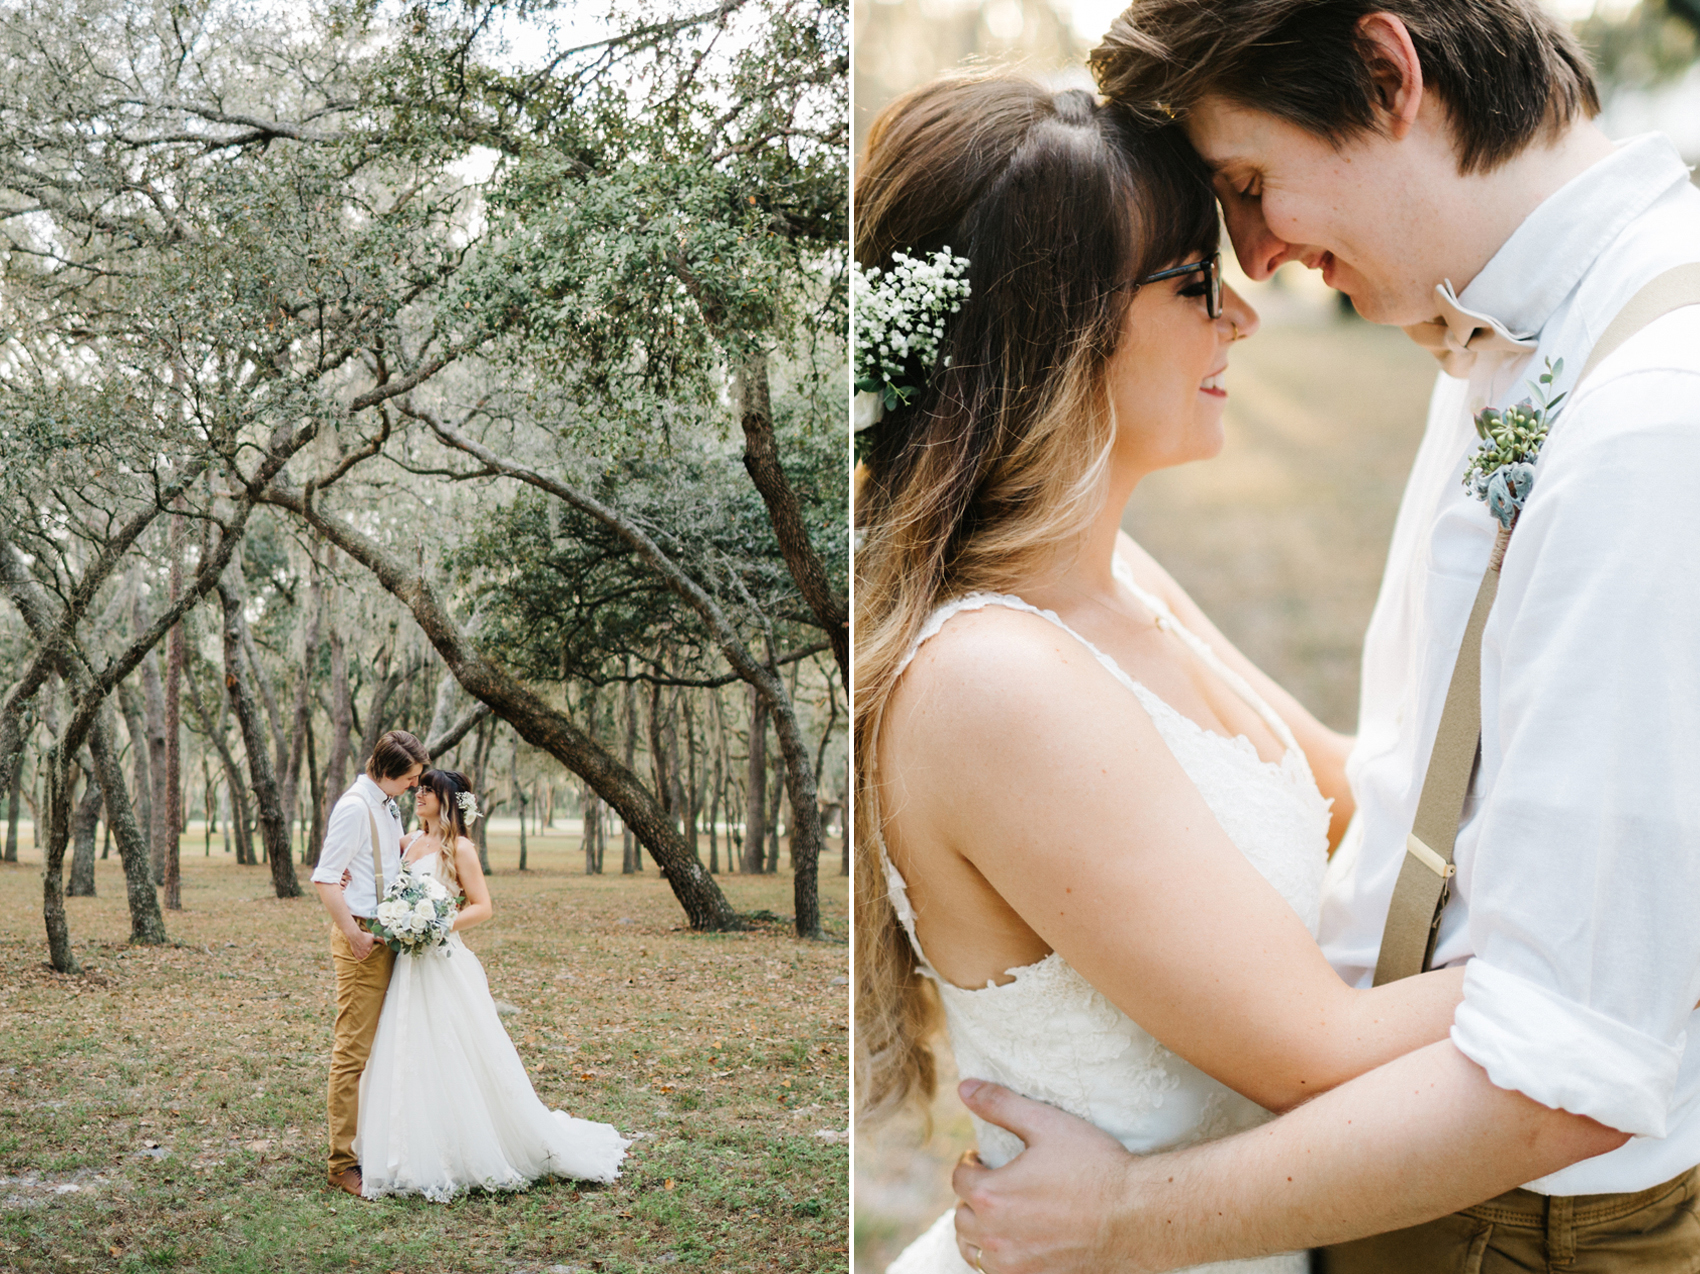 romantic wedding photography at sunset under the rustic oak trees at the lange farm in Dade city, Florida